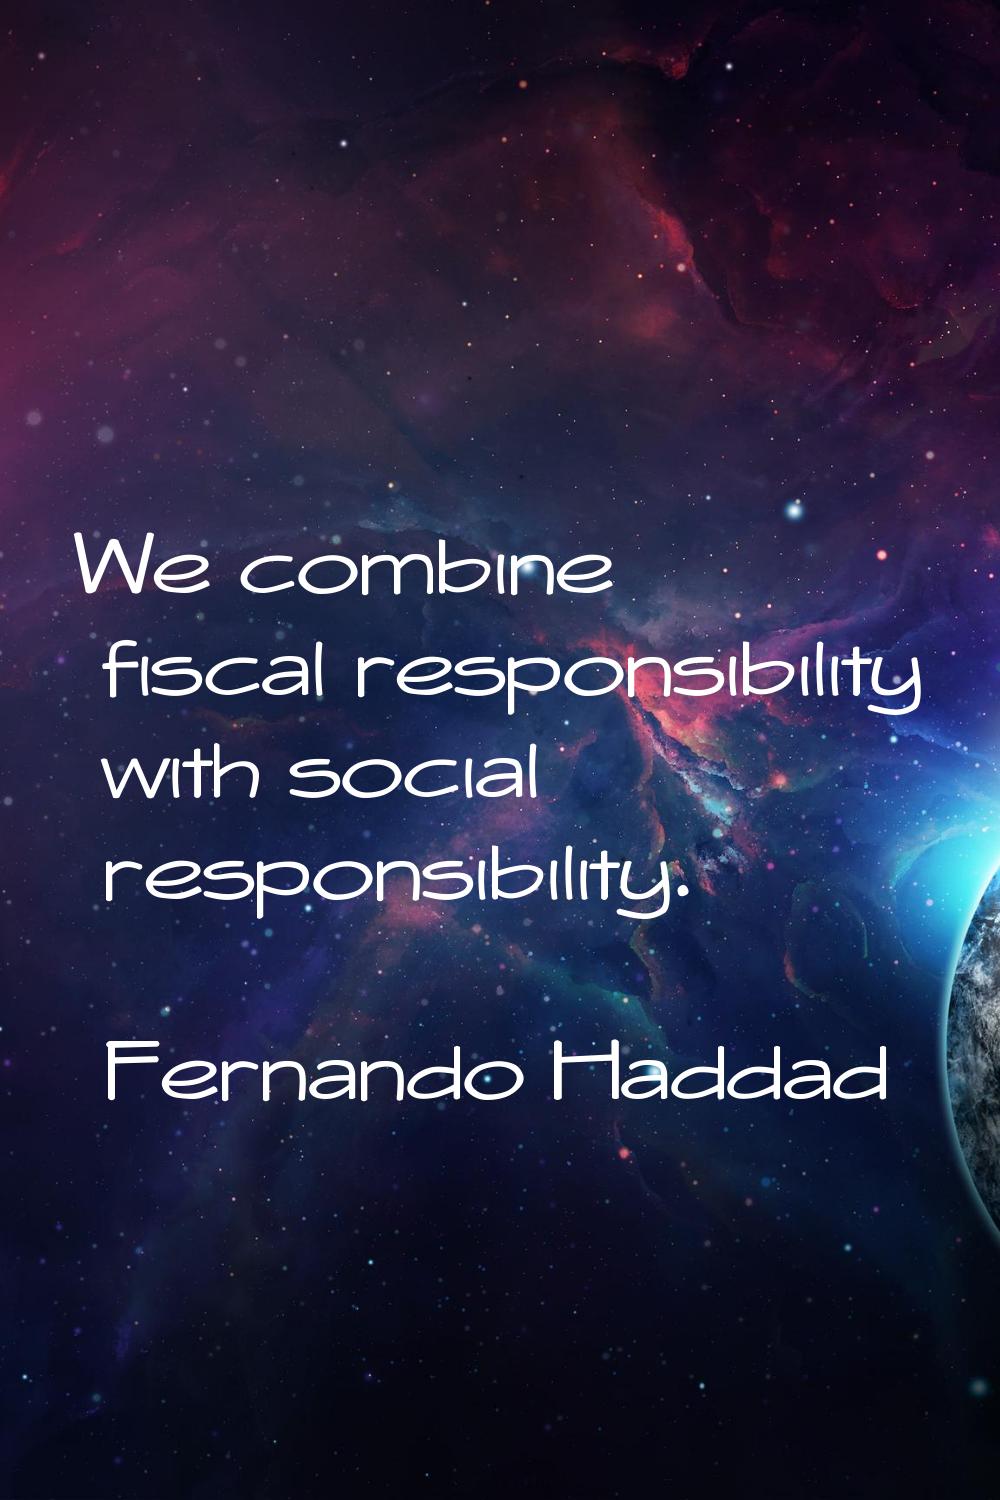 We combine fiscal responsibility with social responsibility.